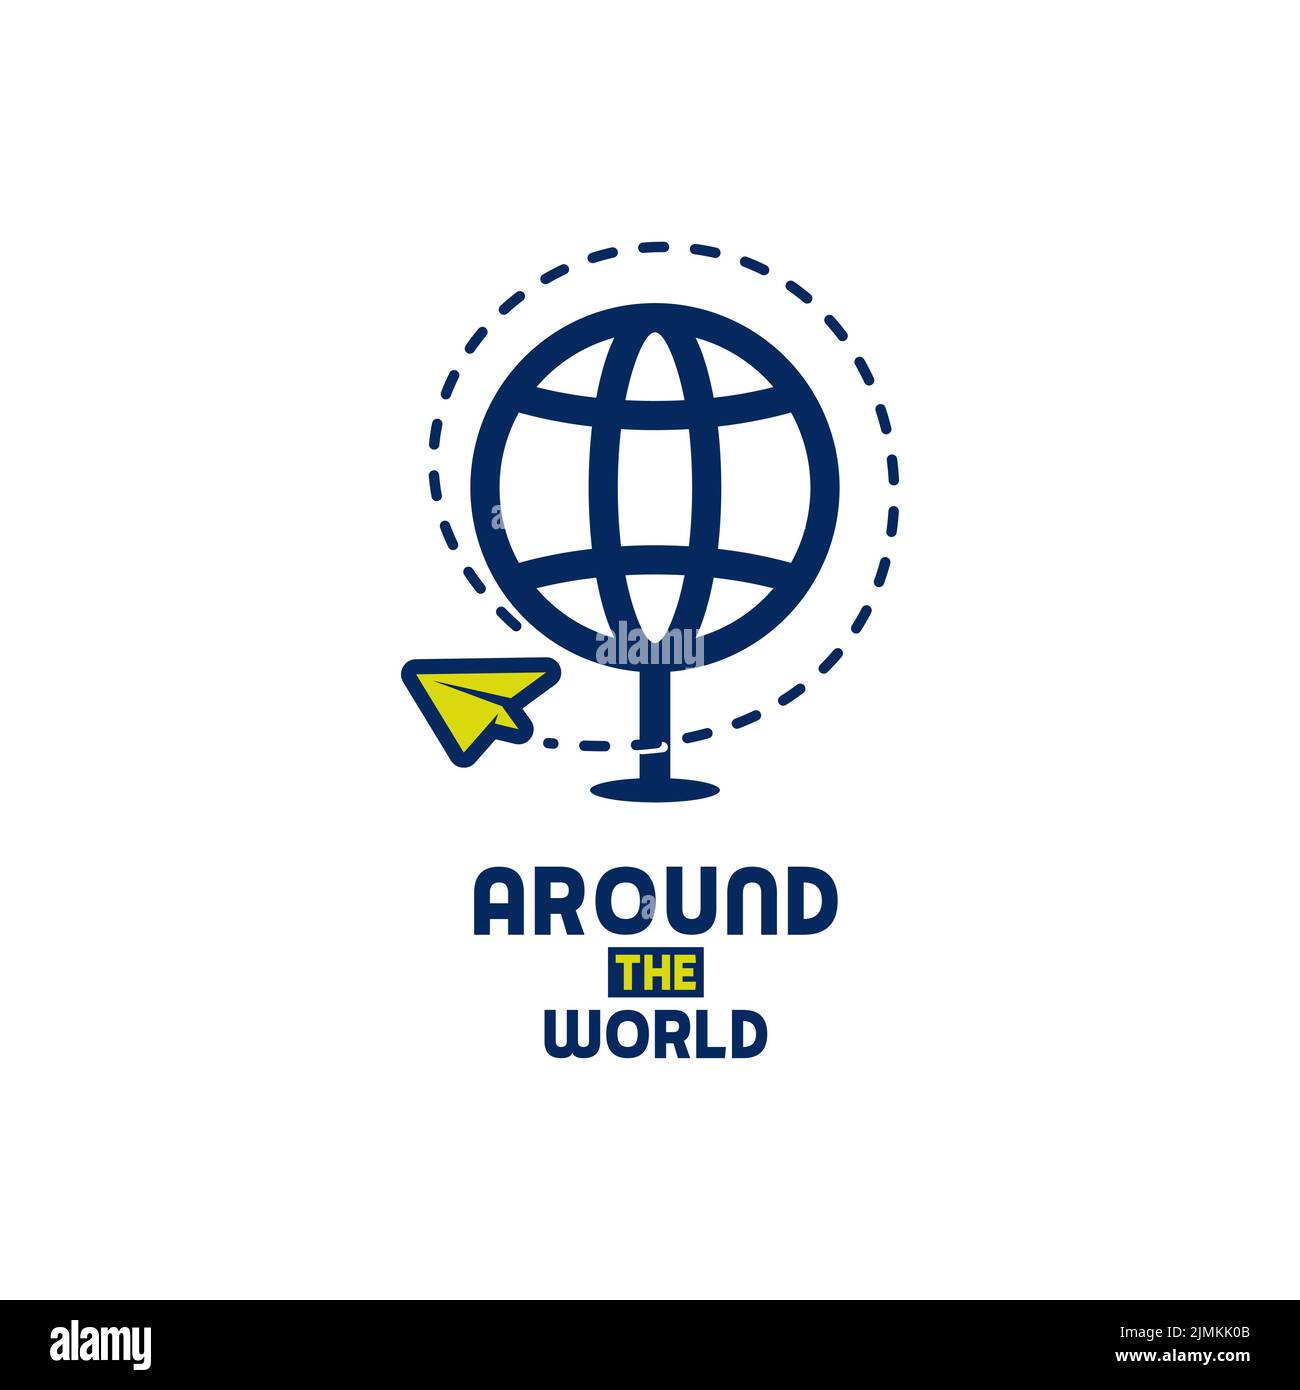 Globe, Paper Plane And Airplane Trail For Around The World Logo Design Inspiration Stock Vector